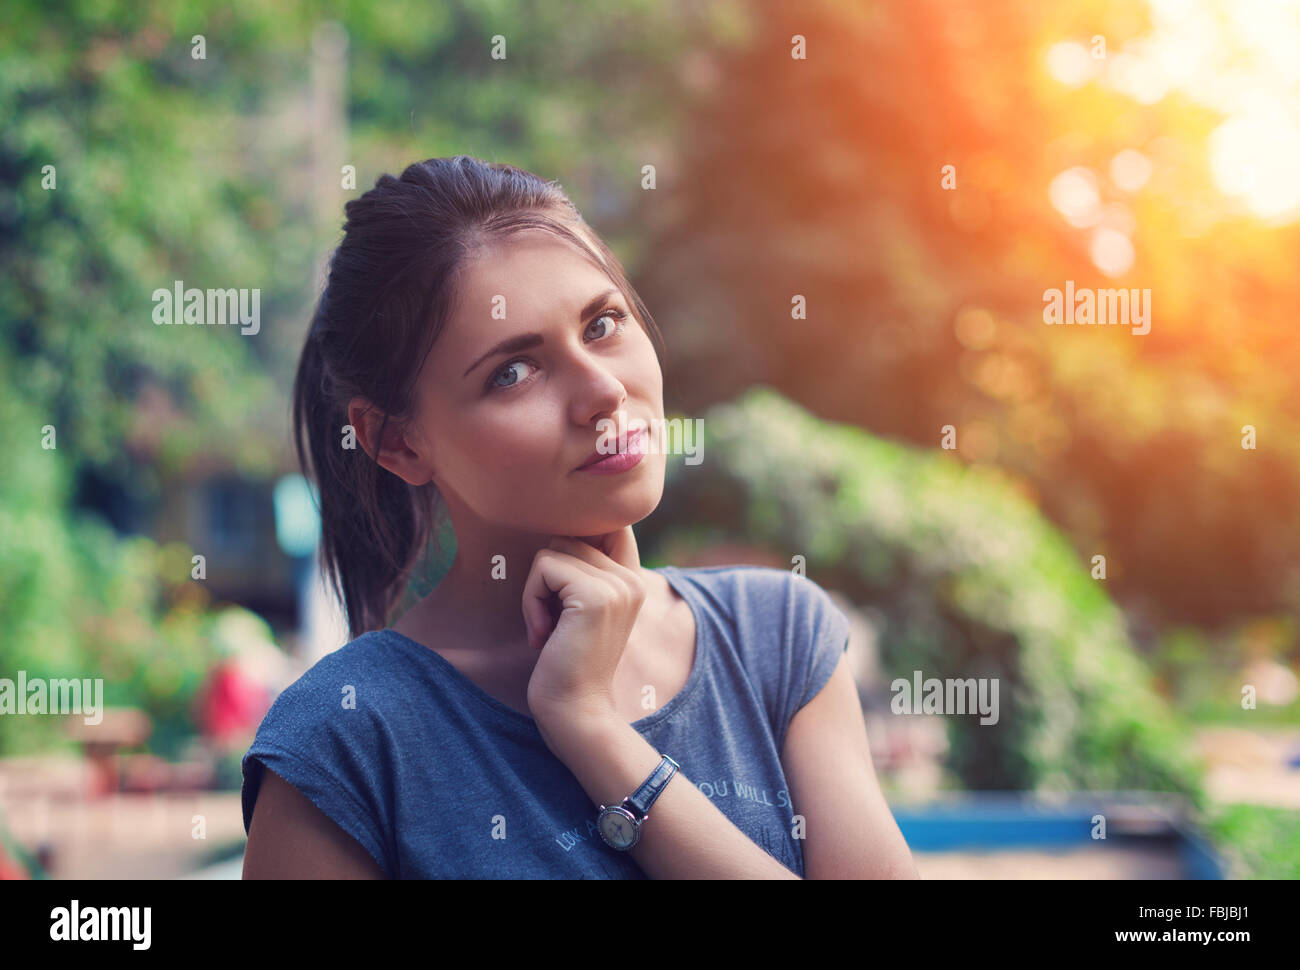 Portrait of a beautiful young woman in park. Stock Photo